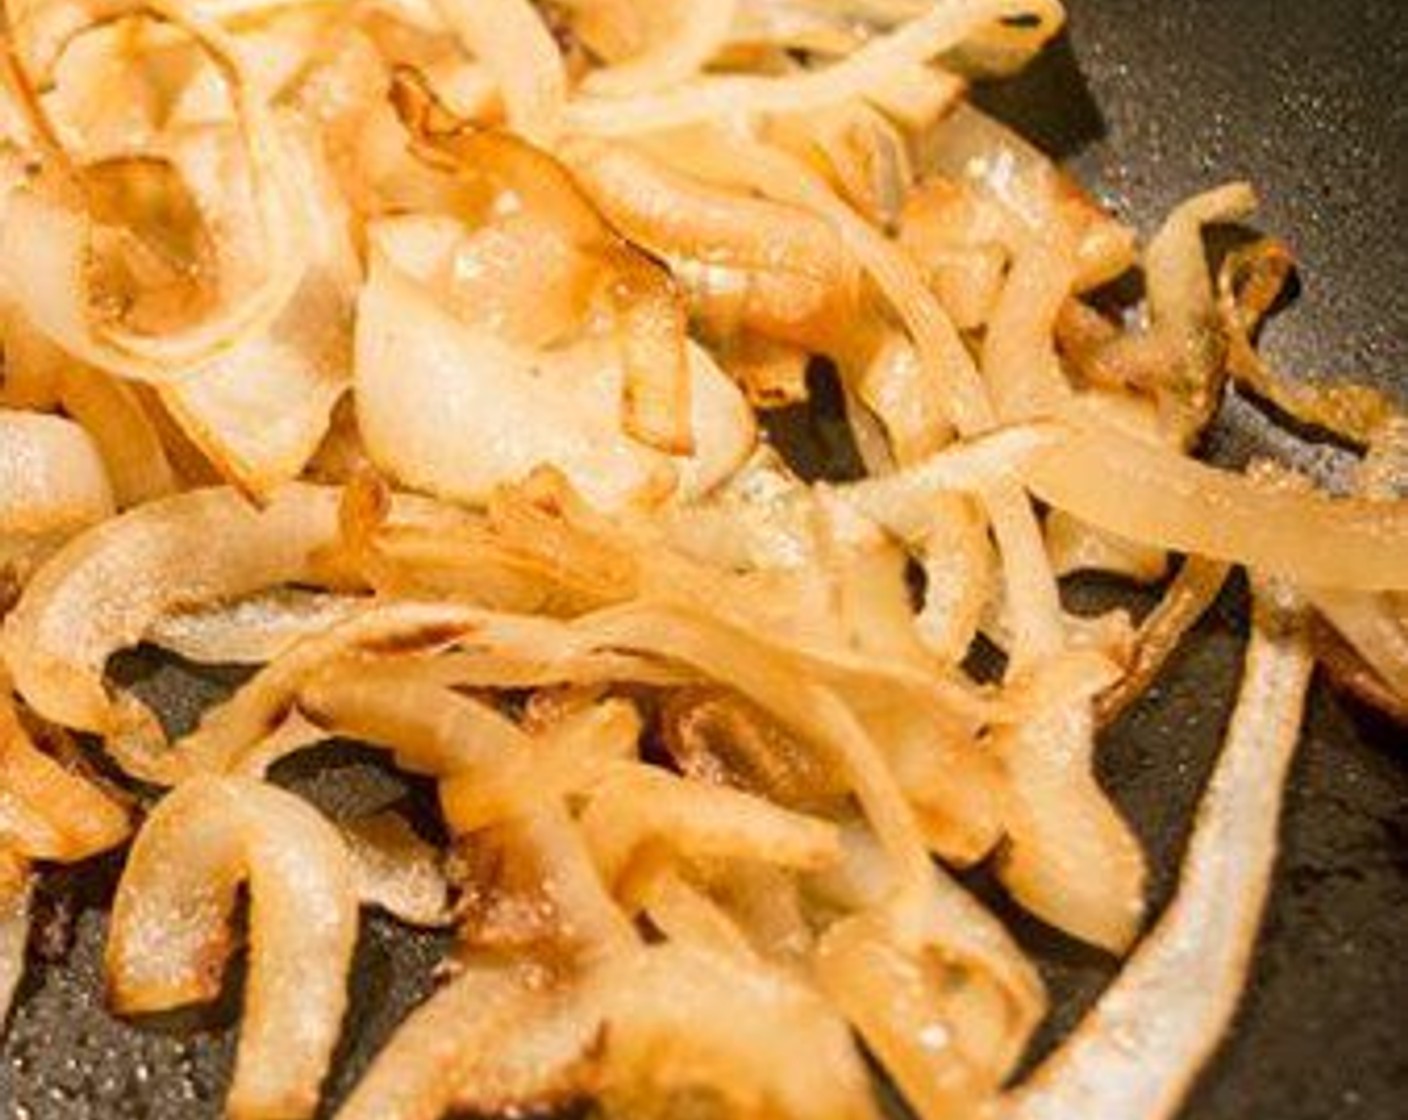 step 8 For the Onions: While the fries cook, caramelize the Onion (1). Heat skillet, coat bottom of the pan with Coconut Oil Cooking Spray (as needed). Add onions and cook over medium-high heat, stirring frequently, for 10-15 minutes or until soft and caramelized. Set aside and keep warm.